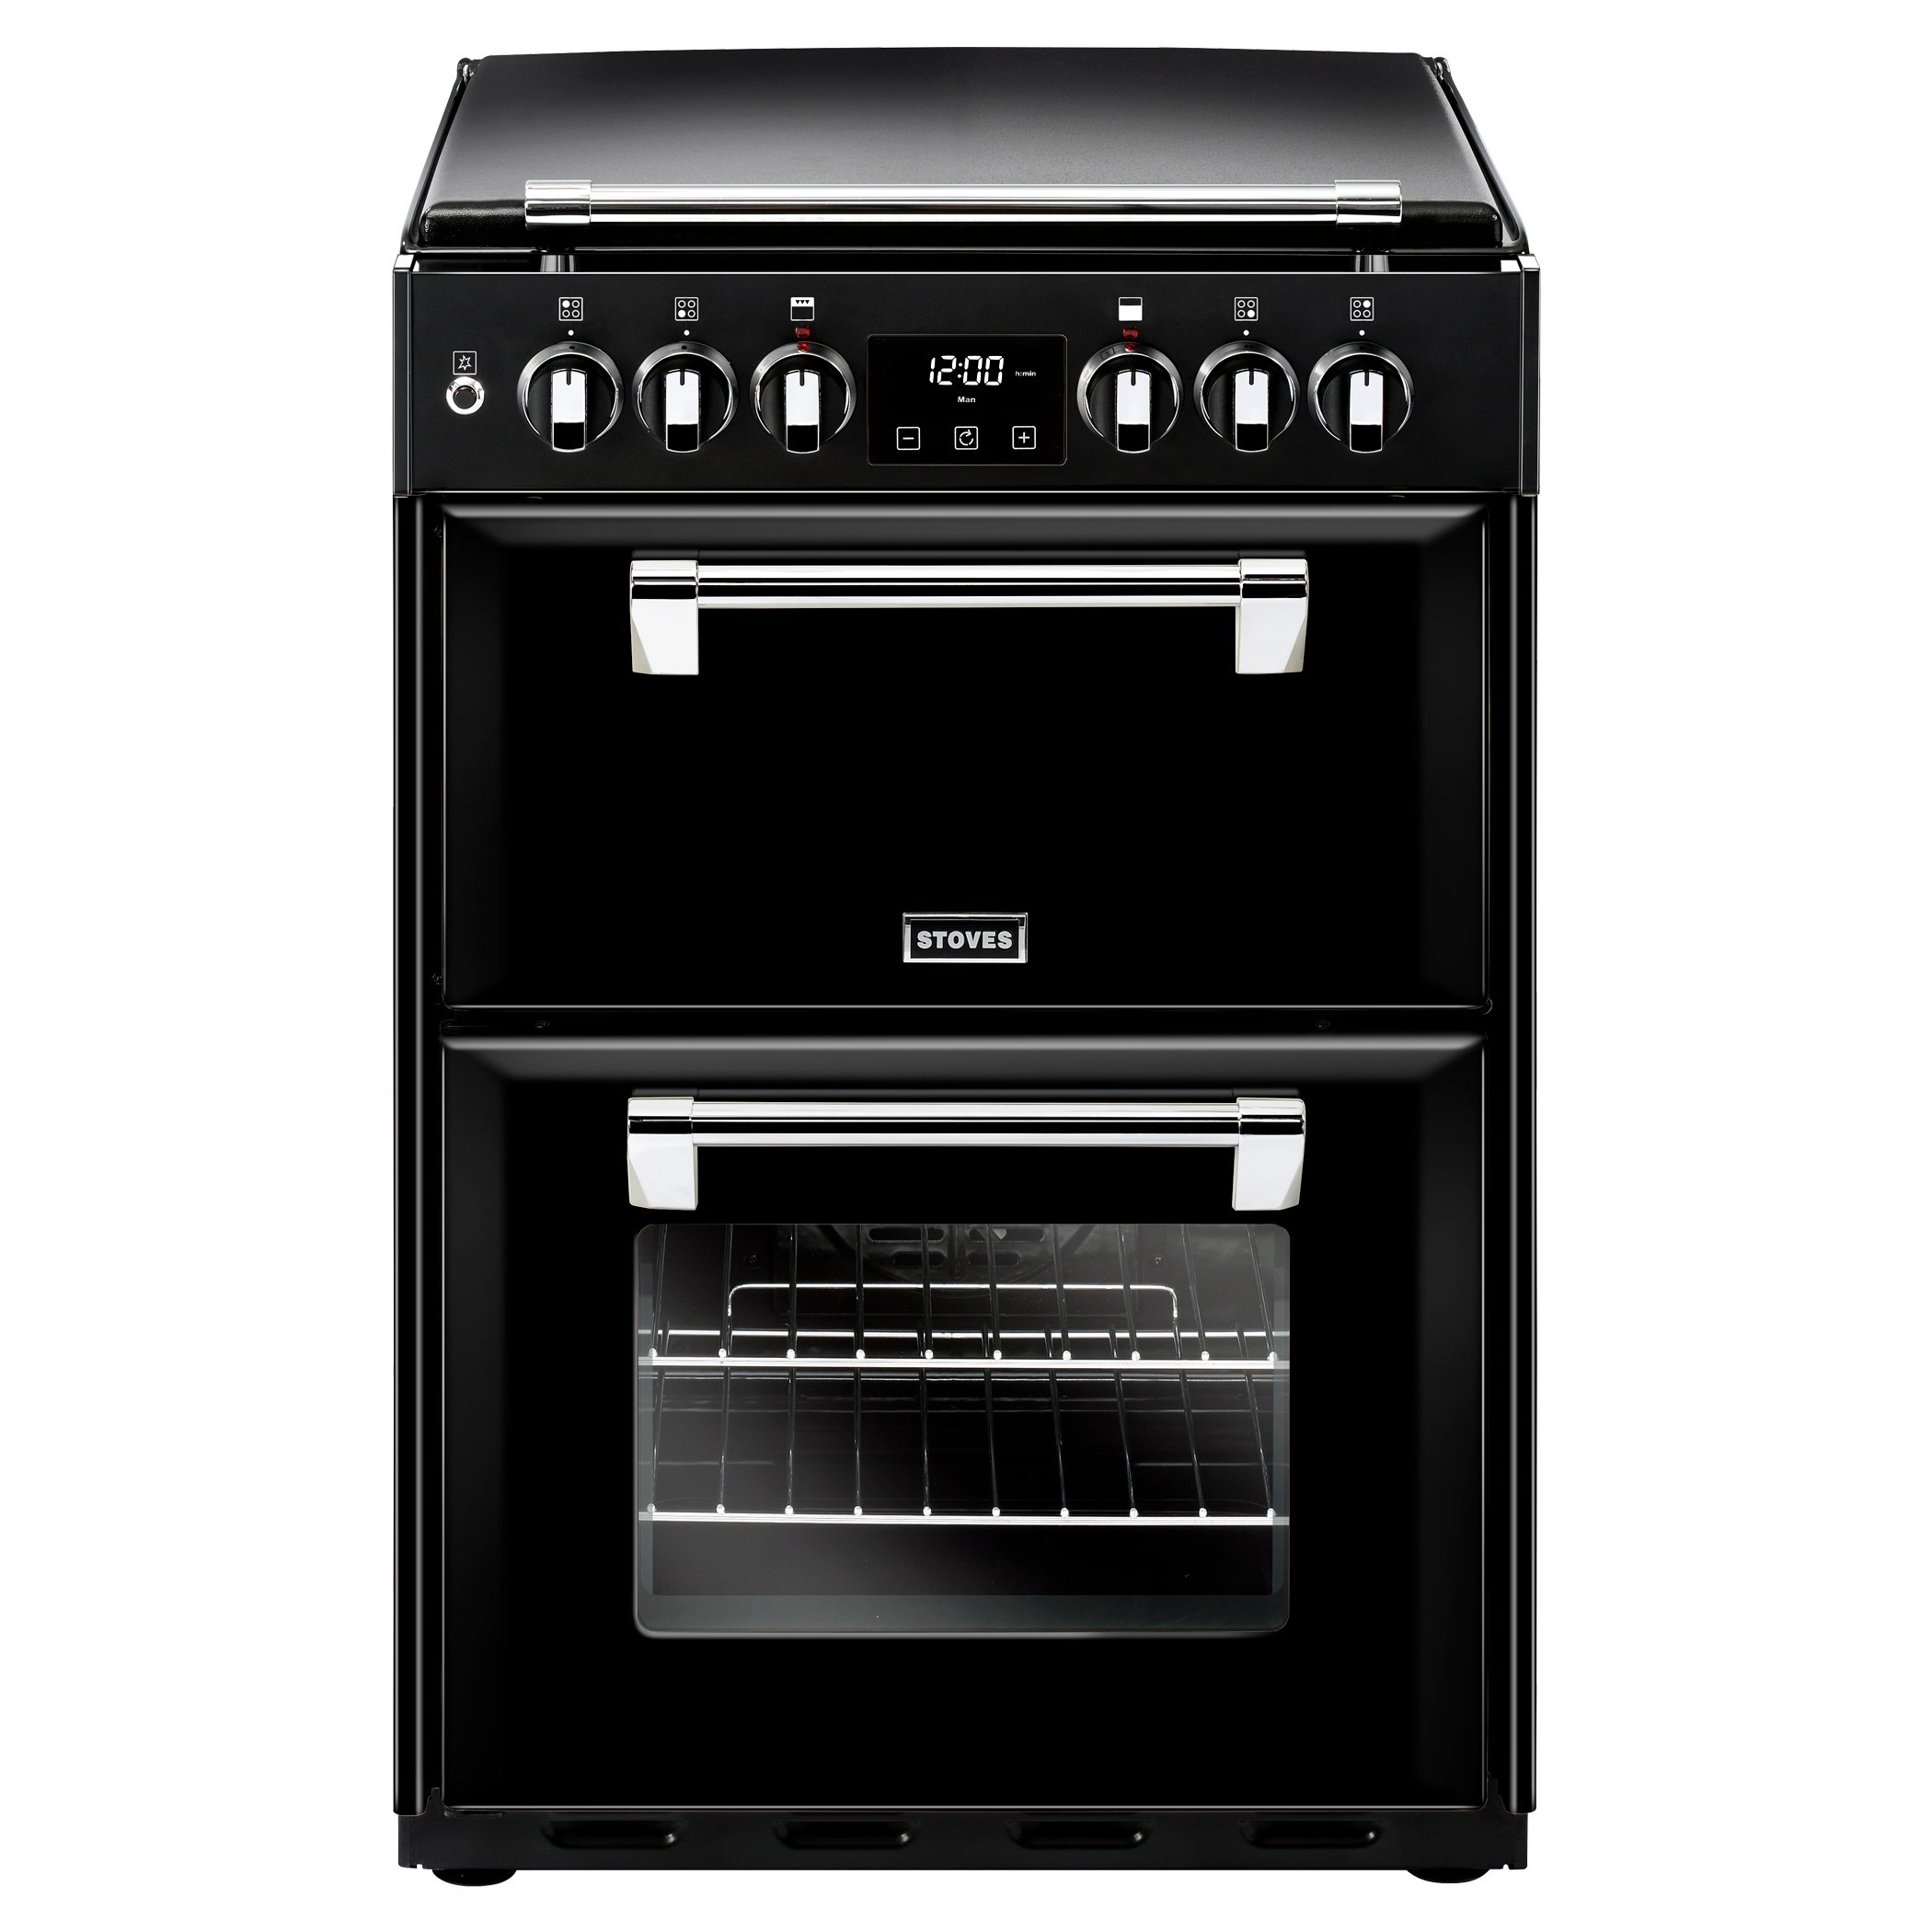 60cm Dual Fuel Range Cooker With Cast Aluminium Lid, 4 Burner Gas Hob, Conventional Oven & Grill and Fanned Main Oven